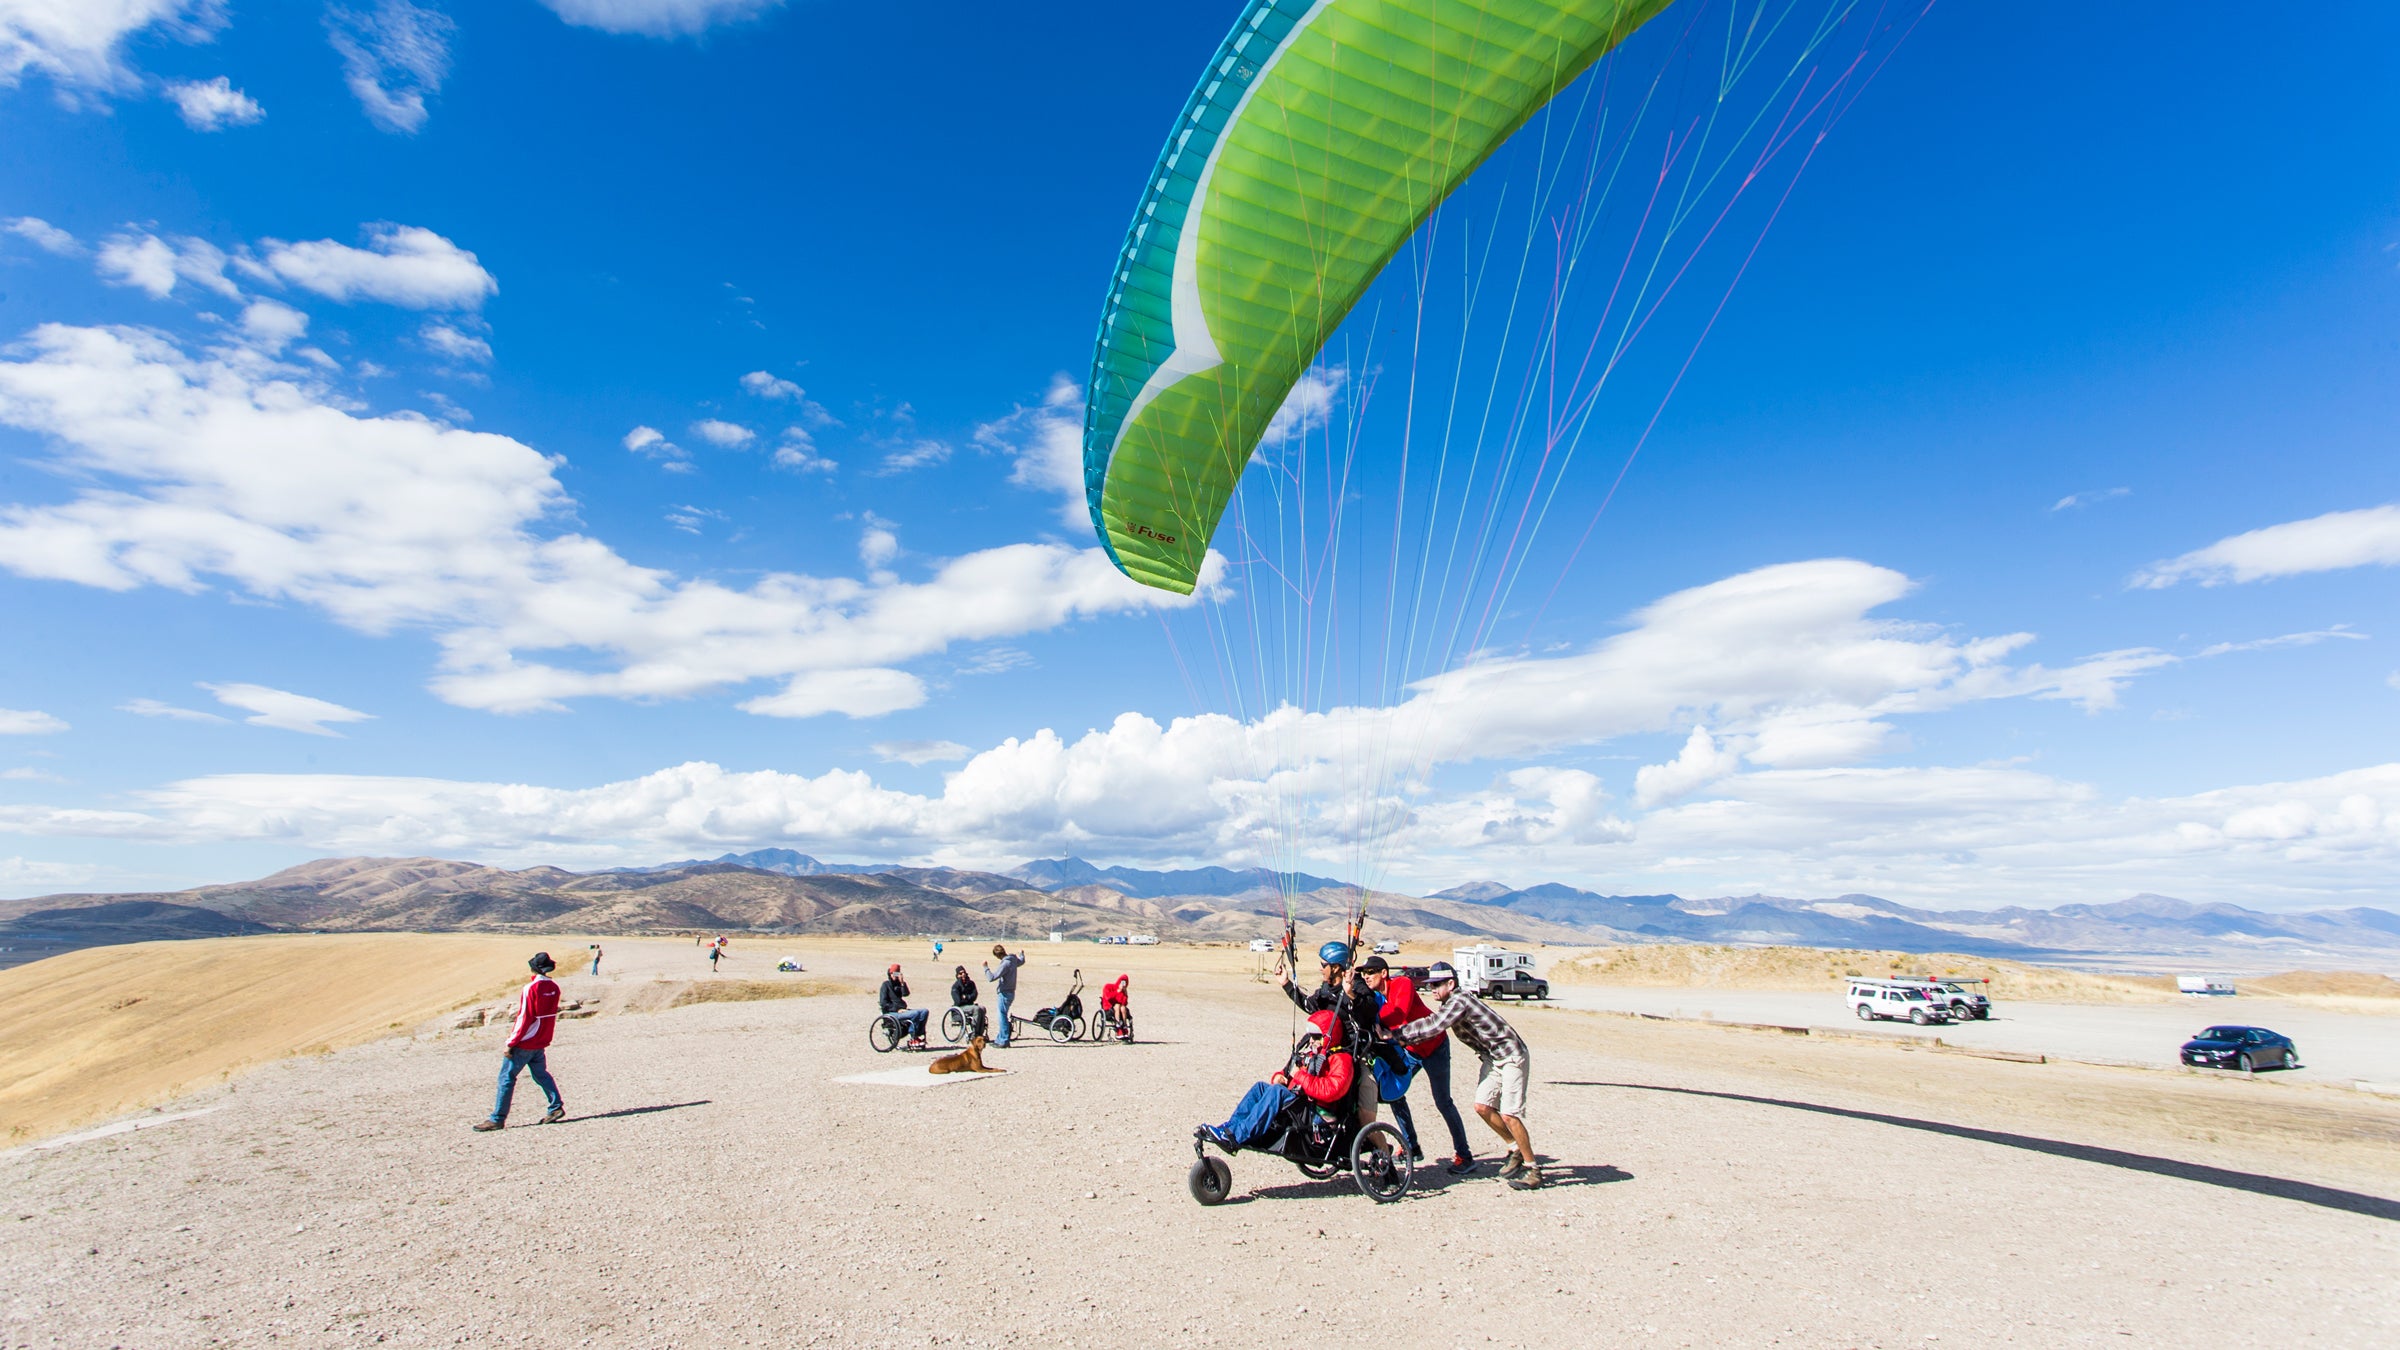 The Freedom of Paragliding with Quadriplegia